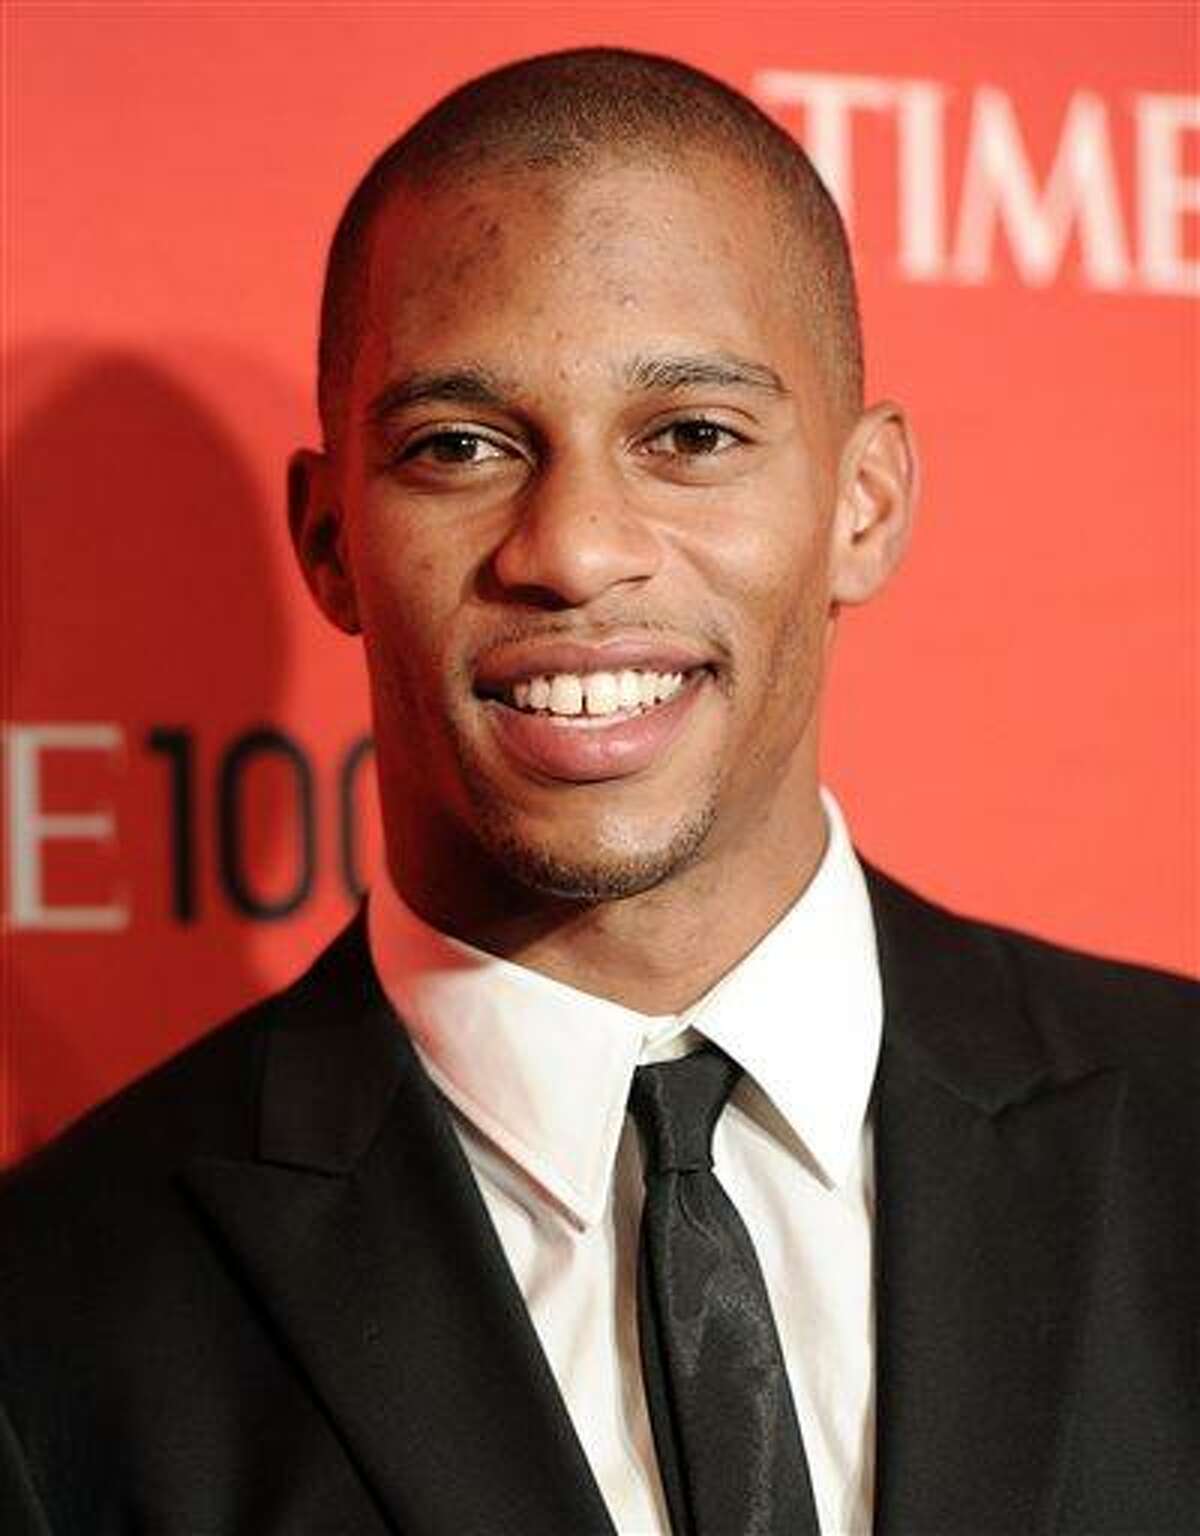 File-This April 24, 2012 file photo shows New York Giants football player Victor Cruz attending the TIME 100 gala, celebrating the 100 most influential people in the world, at the Frederick P. Rose Hall in New York. Cruz has signed a five-year contract extension that runs through the 2018 season. The deal with worth $43 million according to media reports Monday July 8, 2013. Cruz was a restricted free agent with three years in the NFL. Last month, he signed a one-year, $2.879 million tender with the Giants, but a long-term deal was already in the works. The Giants could have matched any offers Cruz received from other teams, so he didn't get any. (AP Photo/Evan Agostini,File)